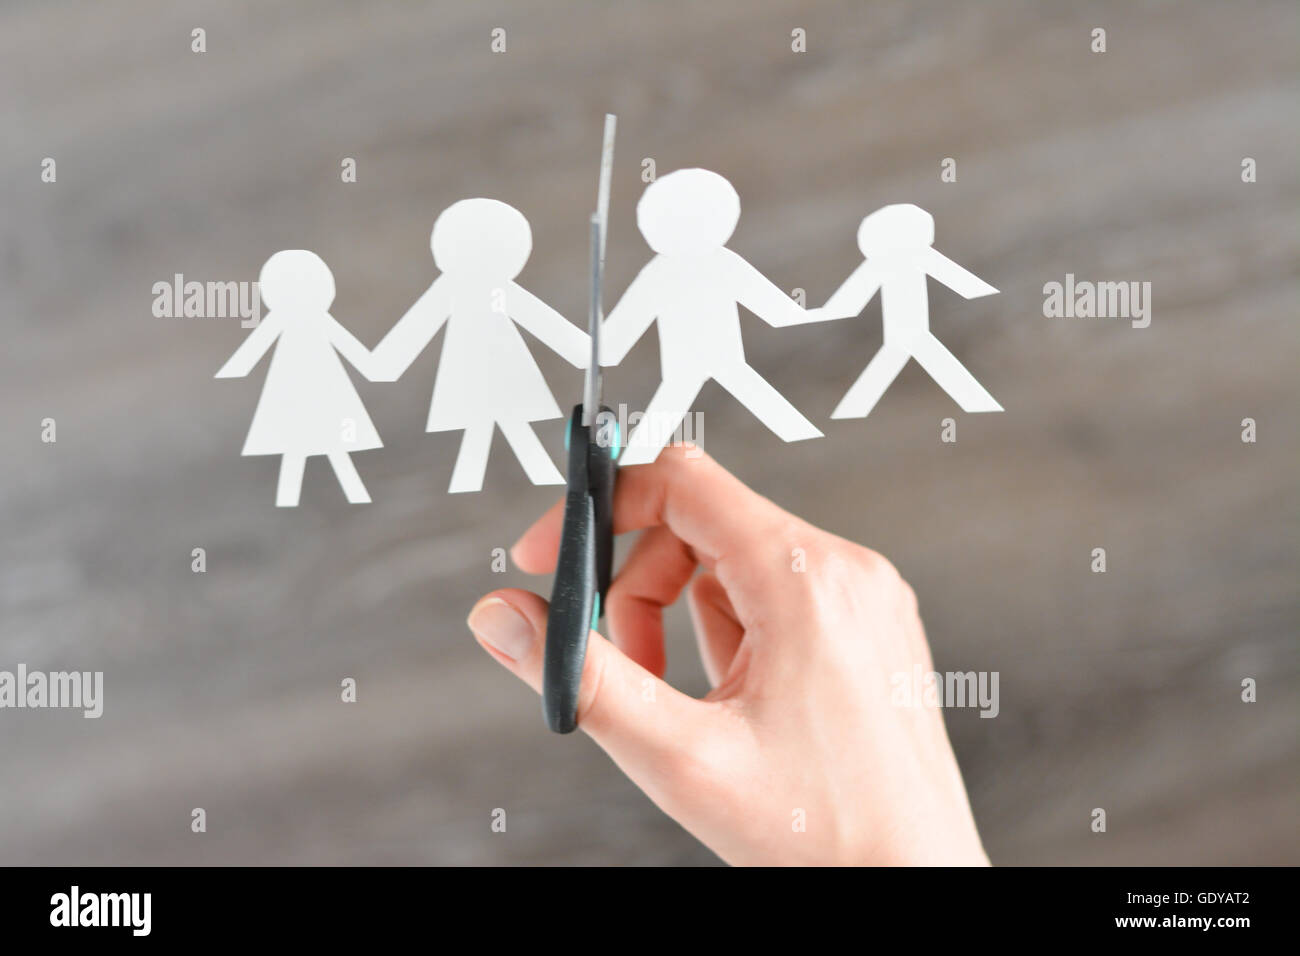 Family divorce concept with human paper shapes and scissors suggesting relationship problems Stock Photo